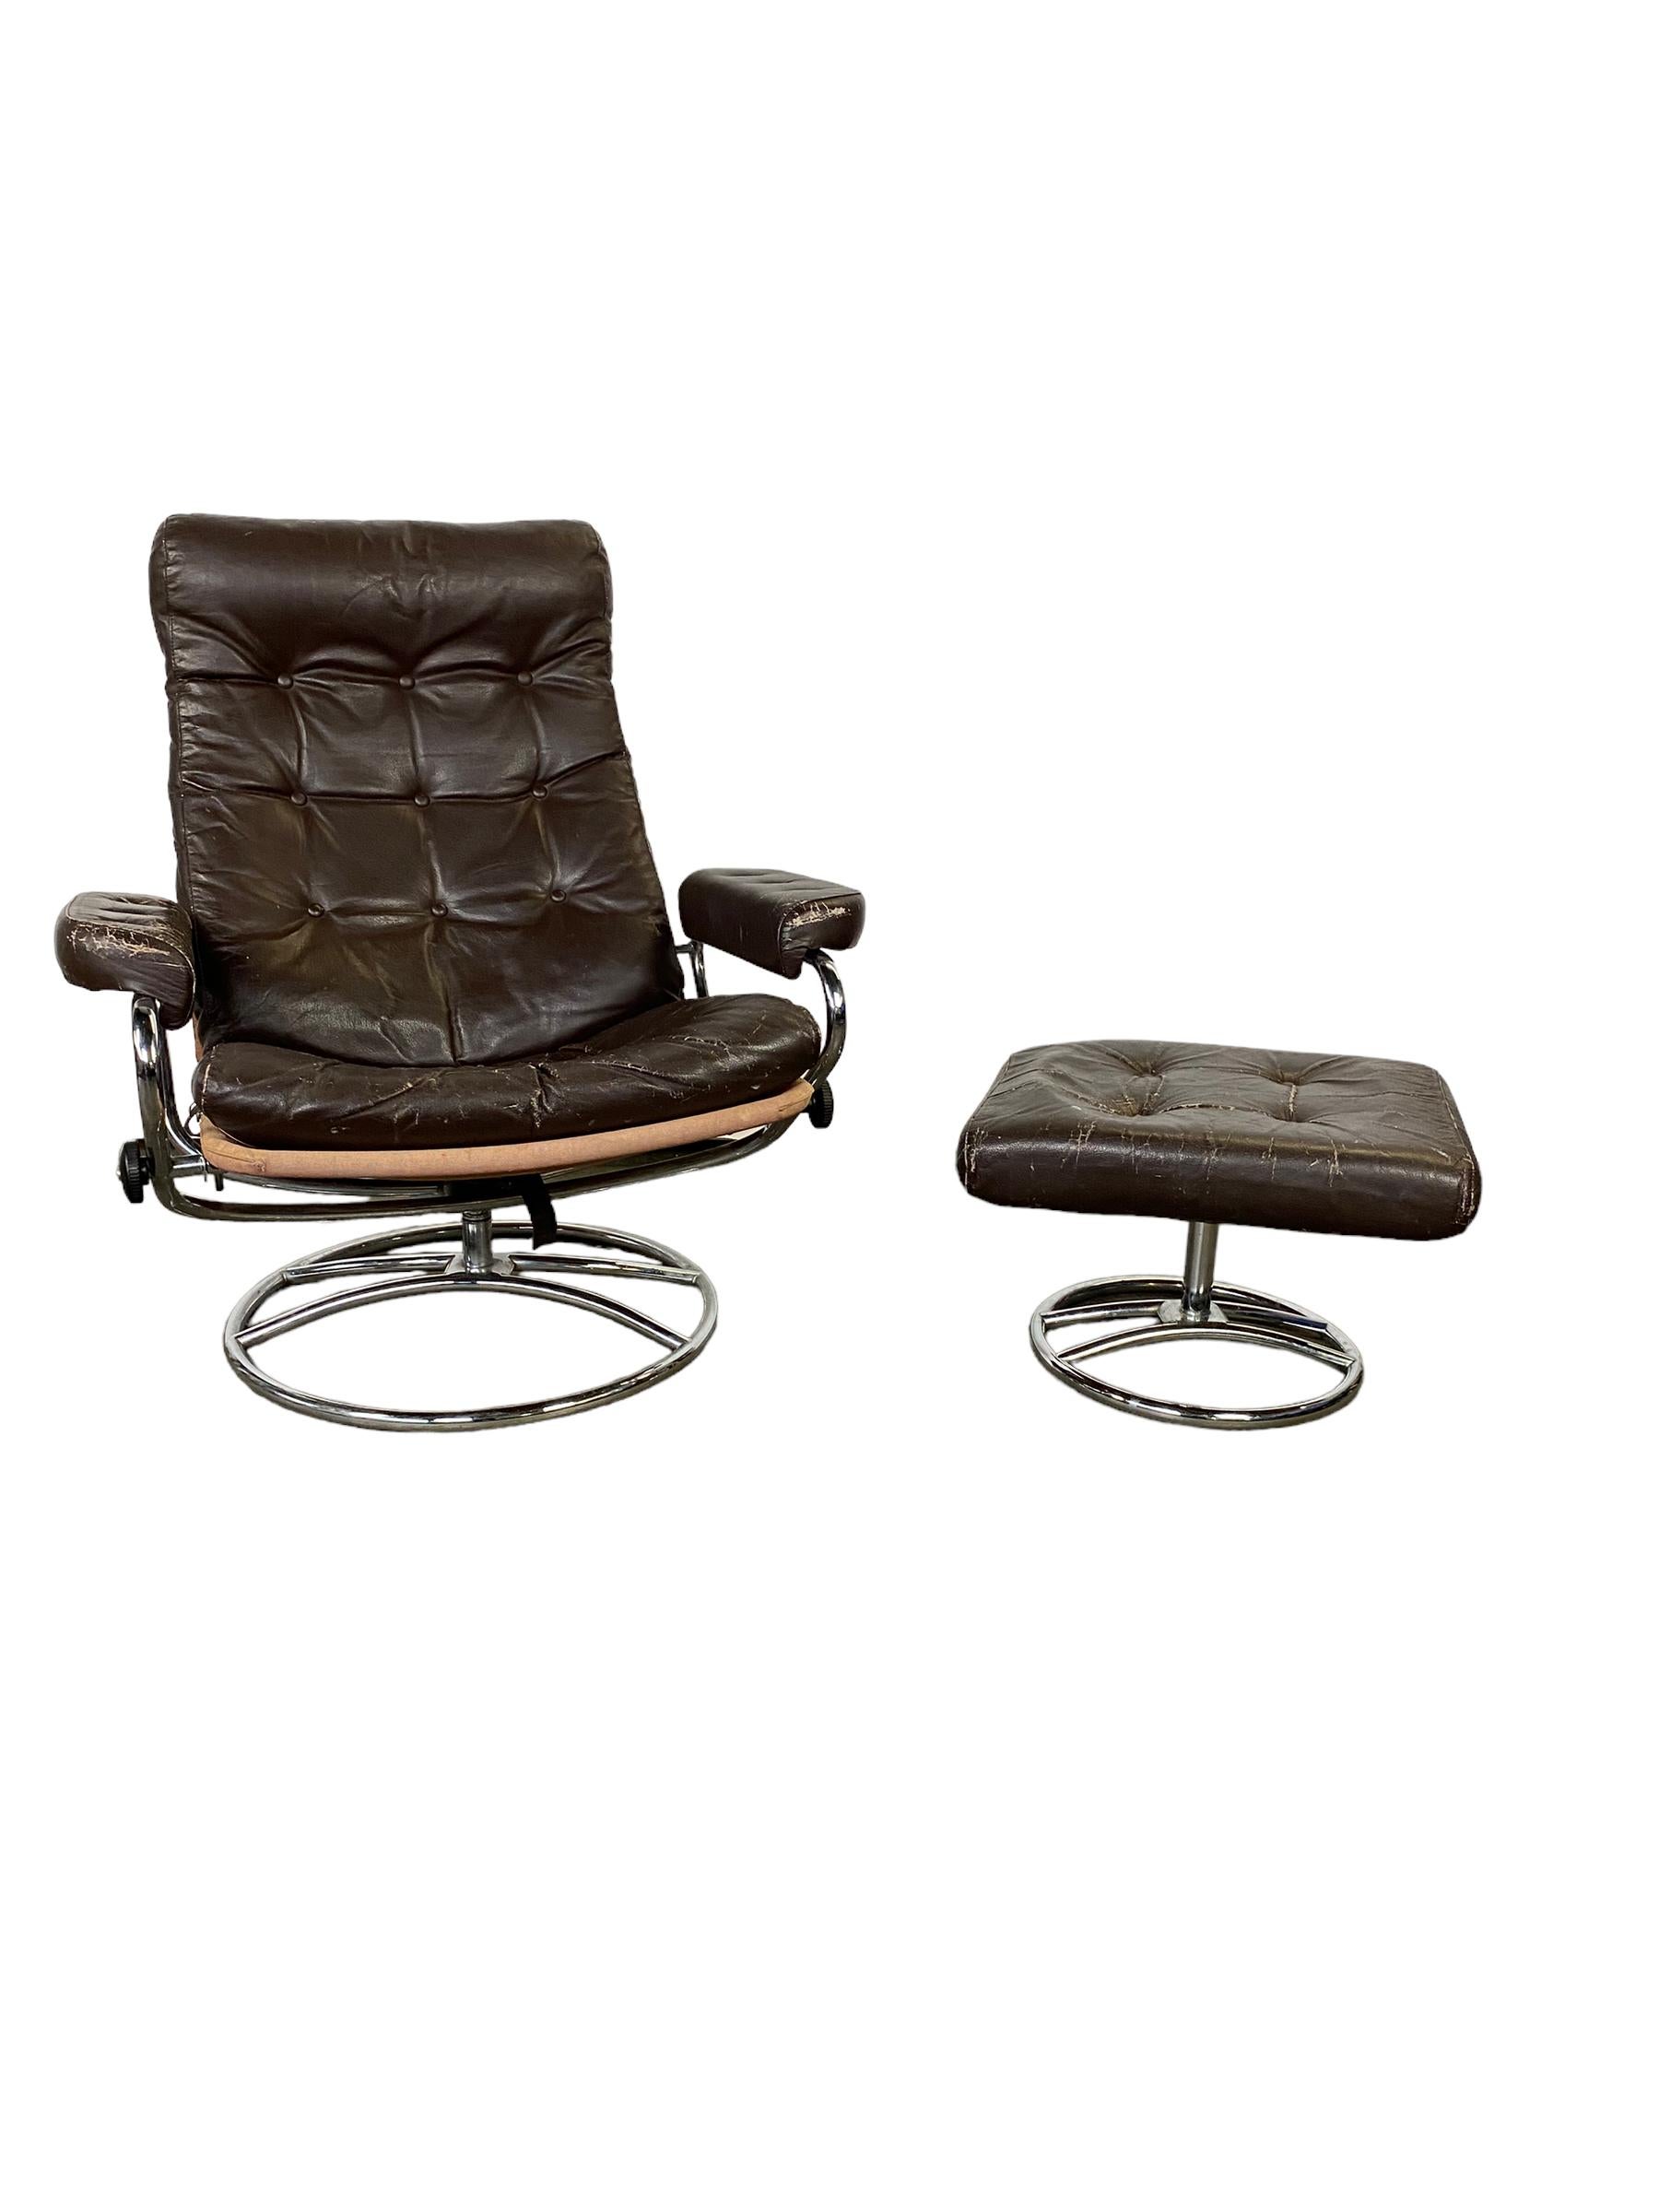 Stressless reclining lounge chair and ottoman in the style of Ekornes. Manufactured by Chairworks. Elegant mid century Scandinavian design with tubular bent chrome frame and espresso dark brown leather cushion. Lounge in comfort with this timeless